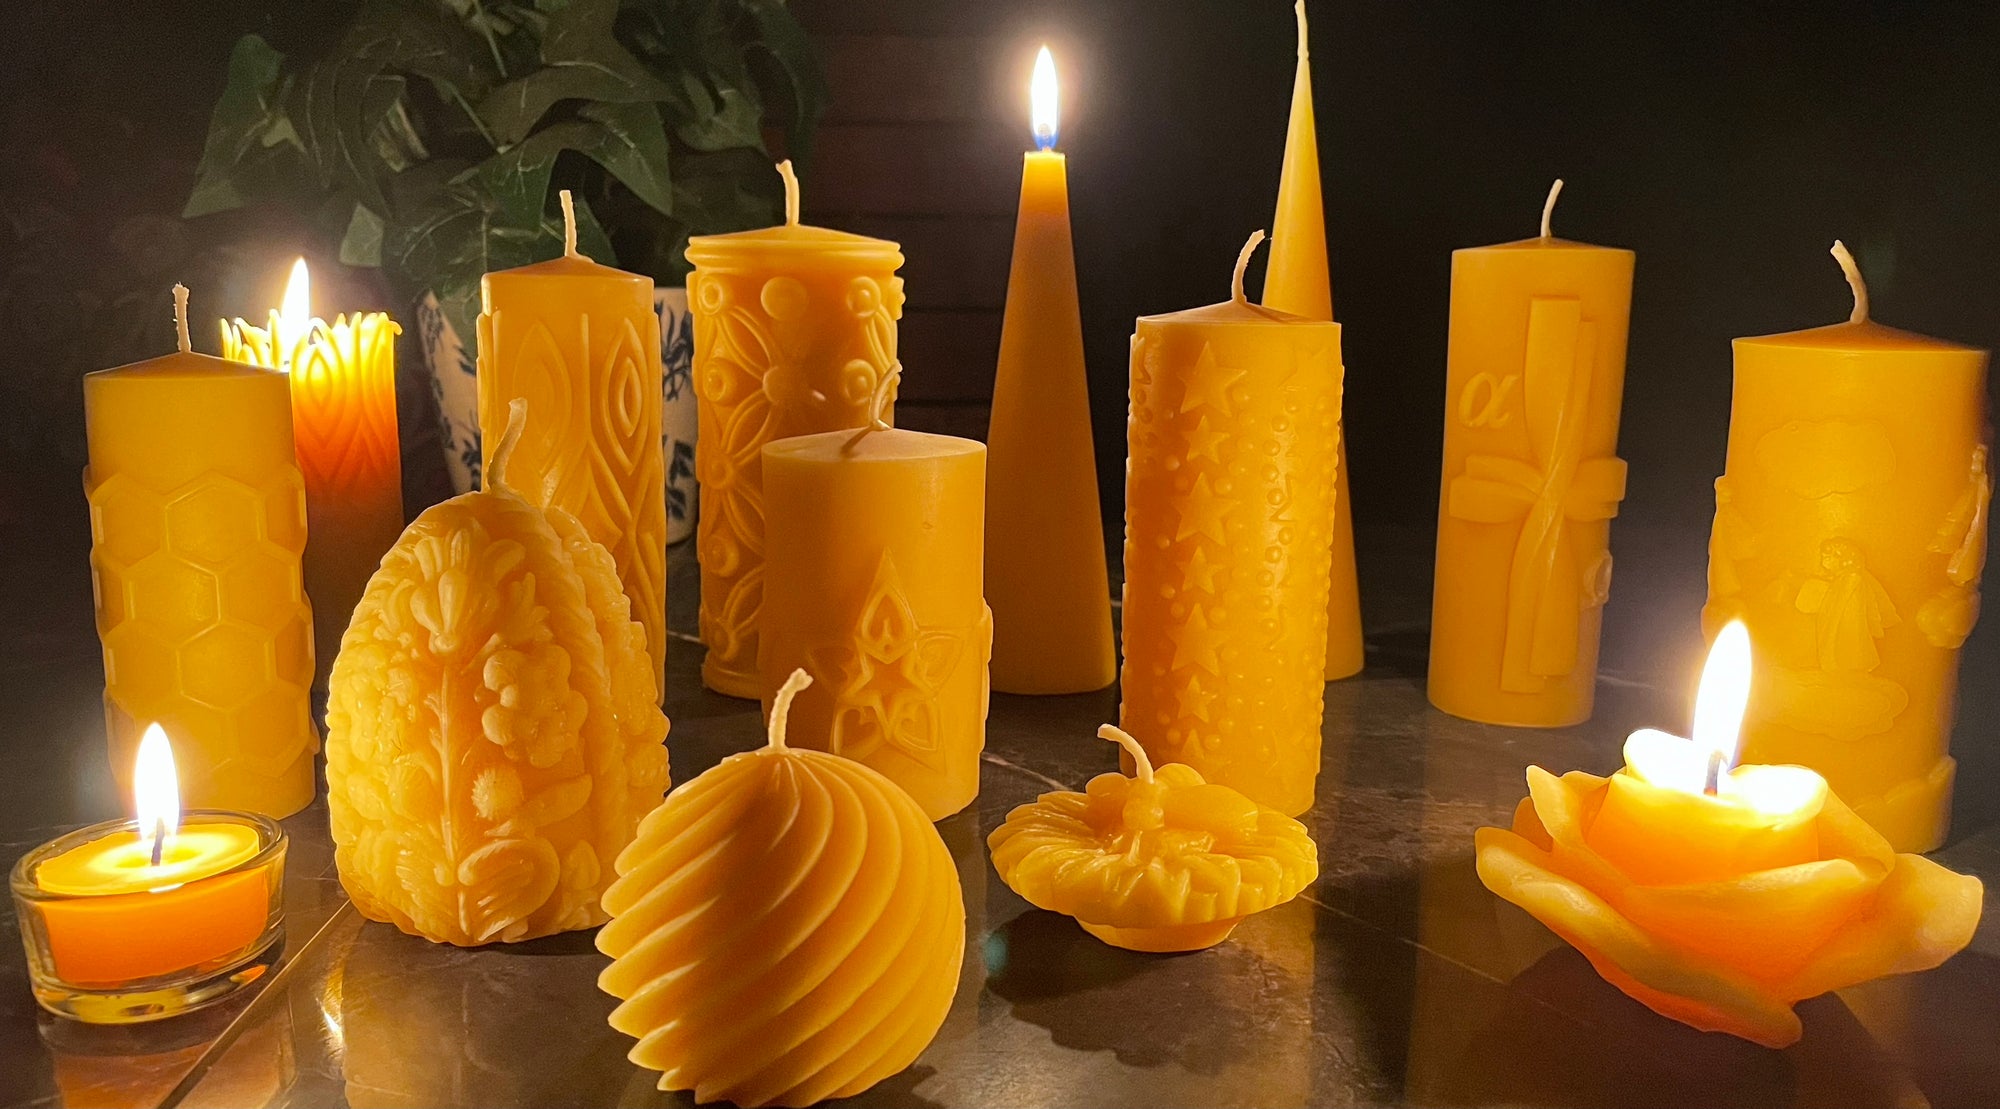 Happy Flame designer beeswax candles